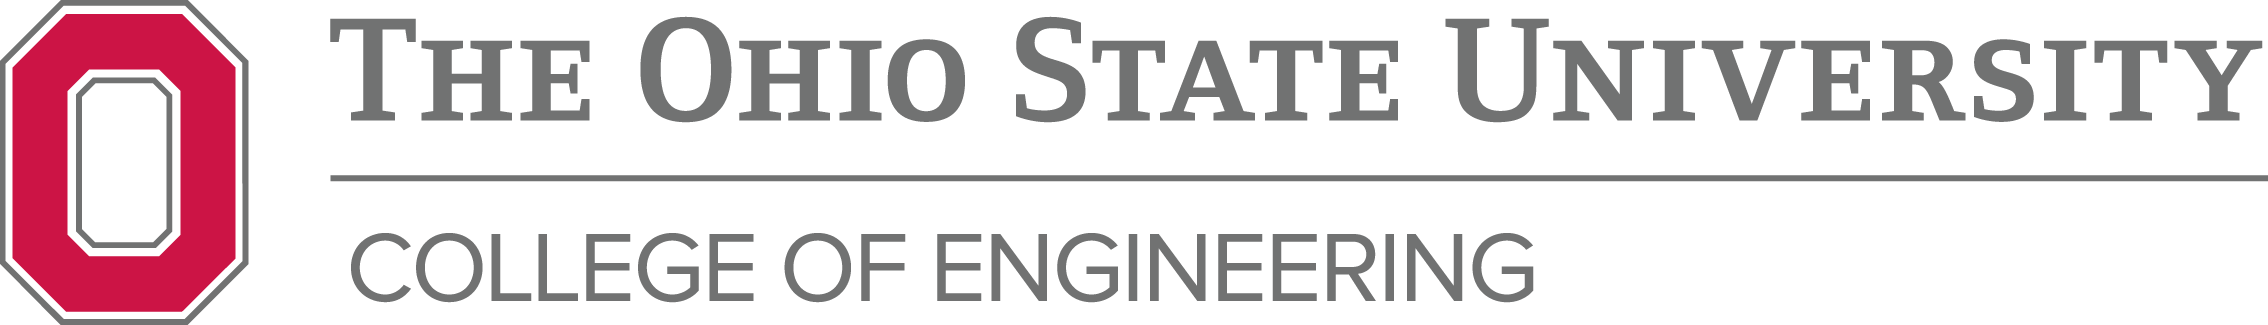 The Ohio State Univeristy College of Engineering_Logo